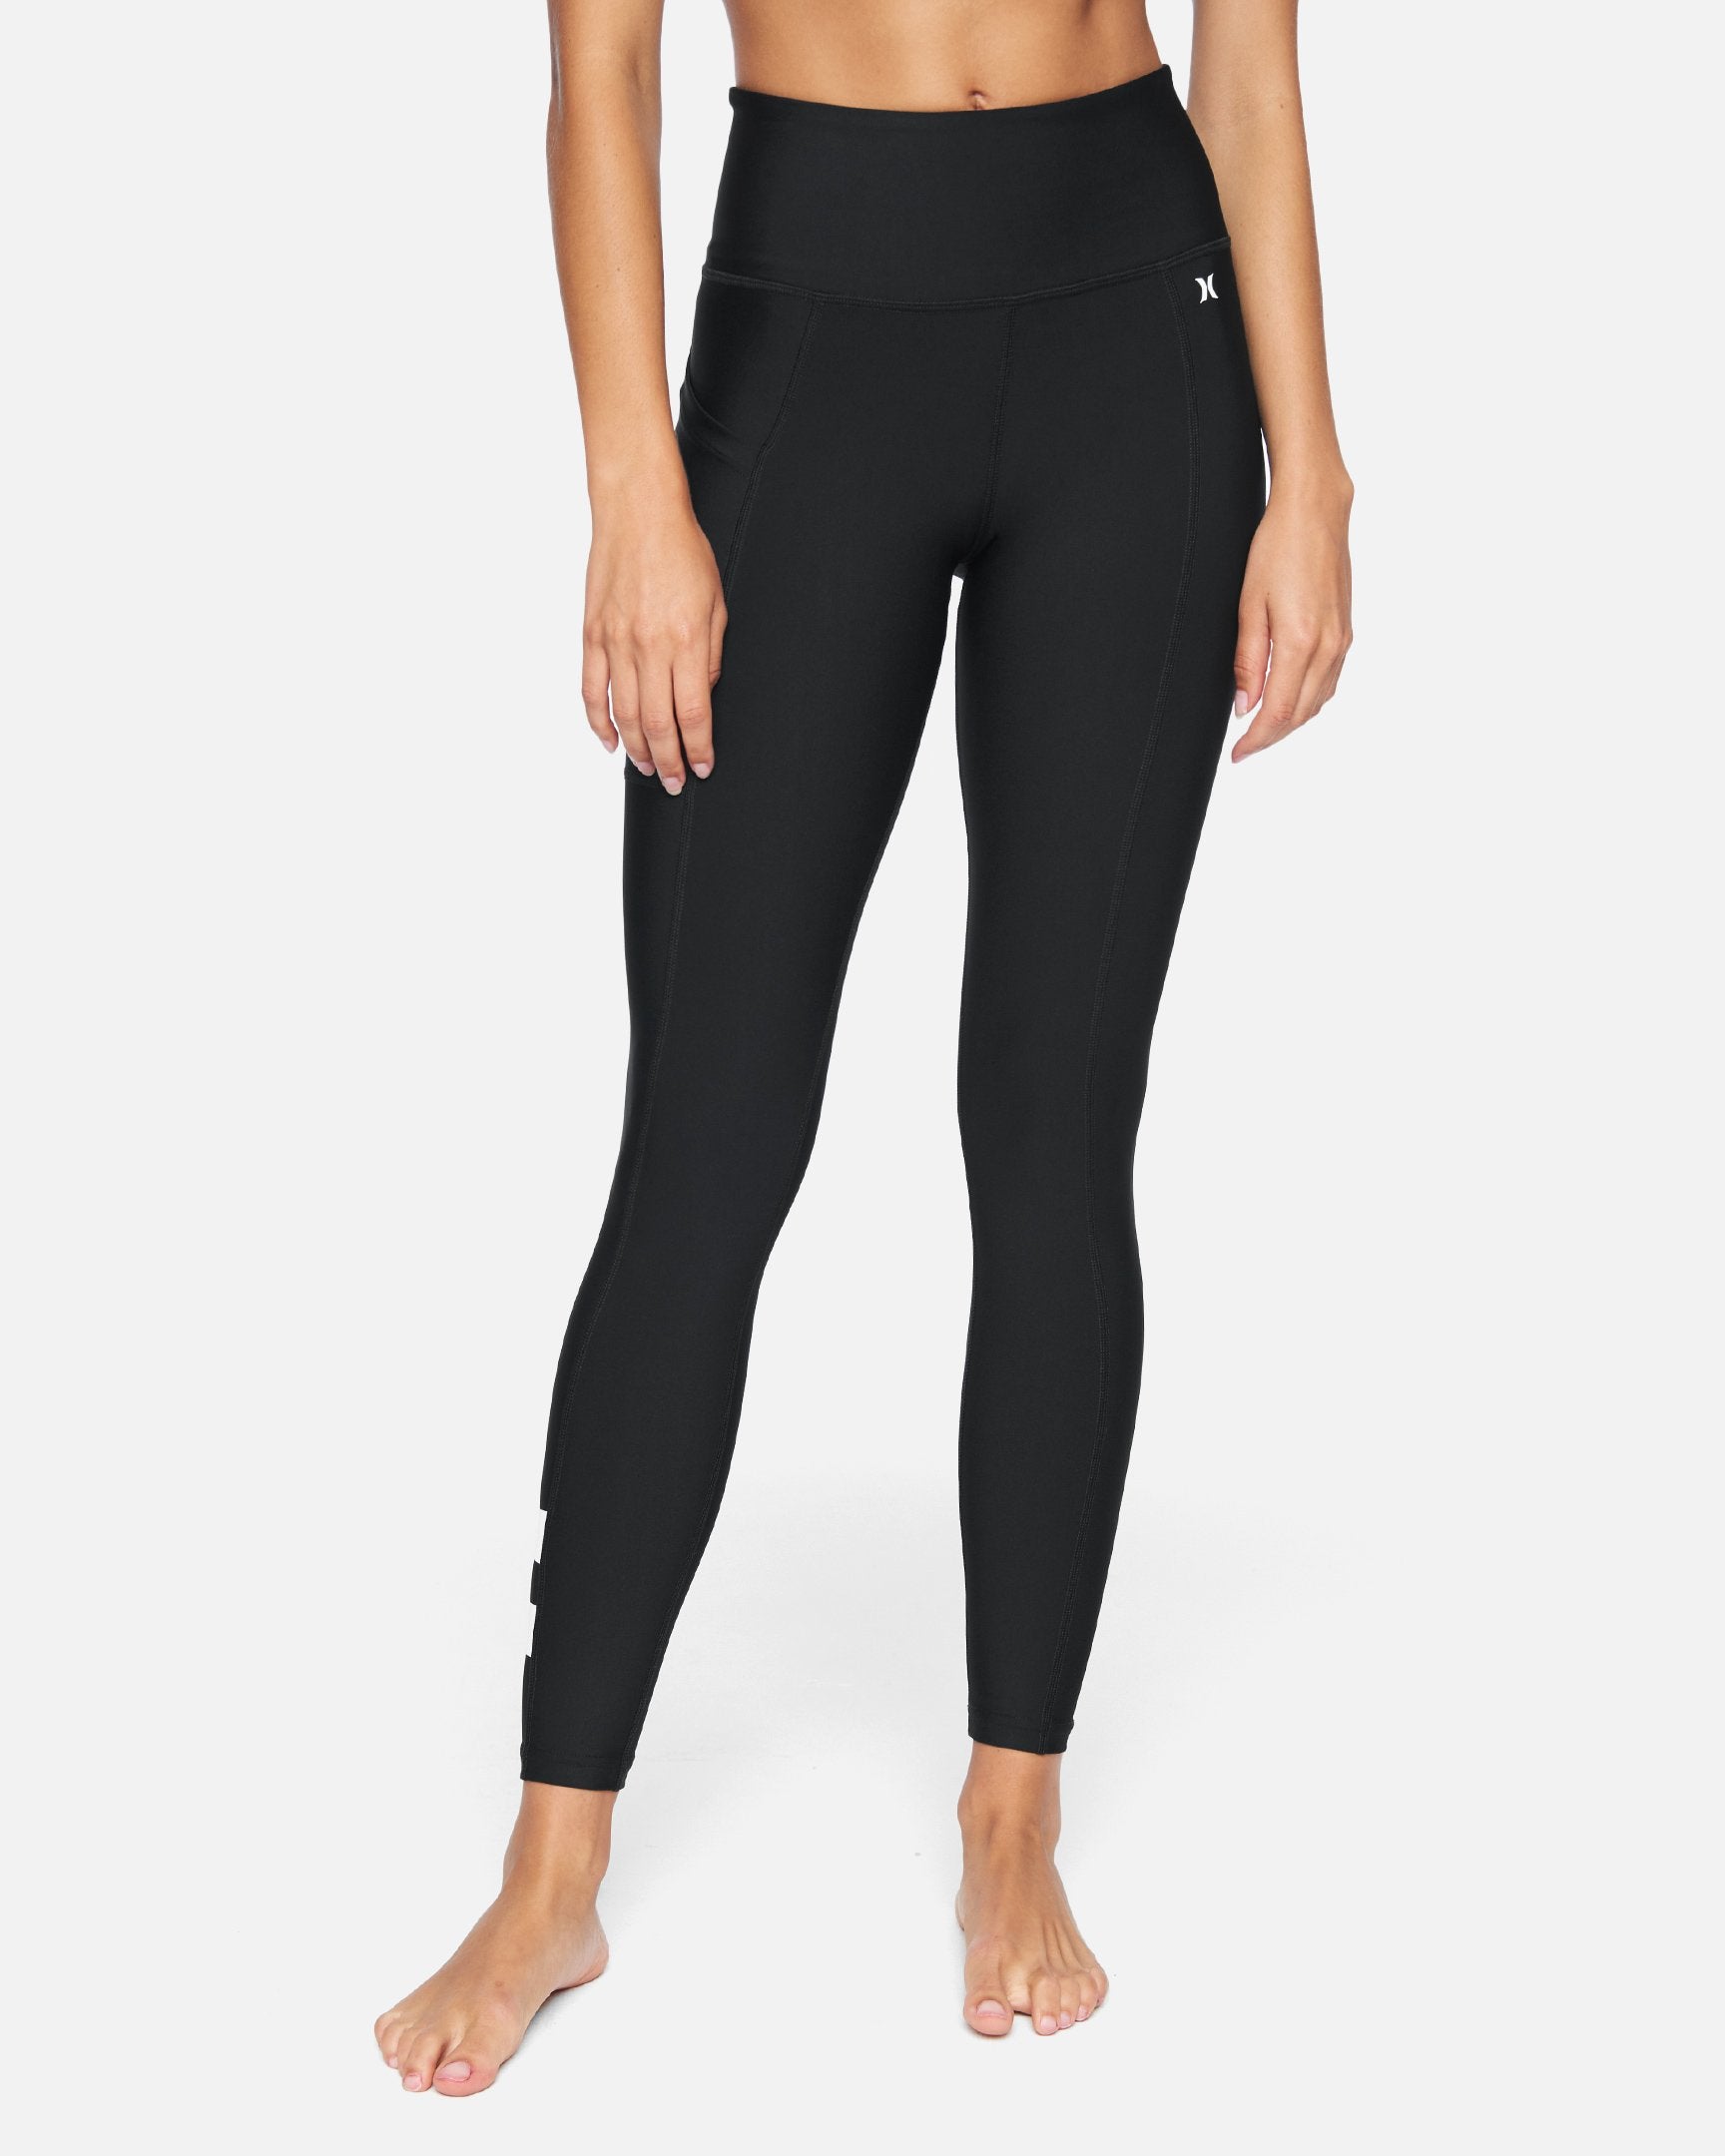 Black Metallic OWfit Leggings - Deliveries in all United States